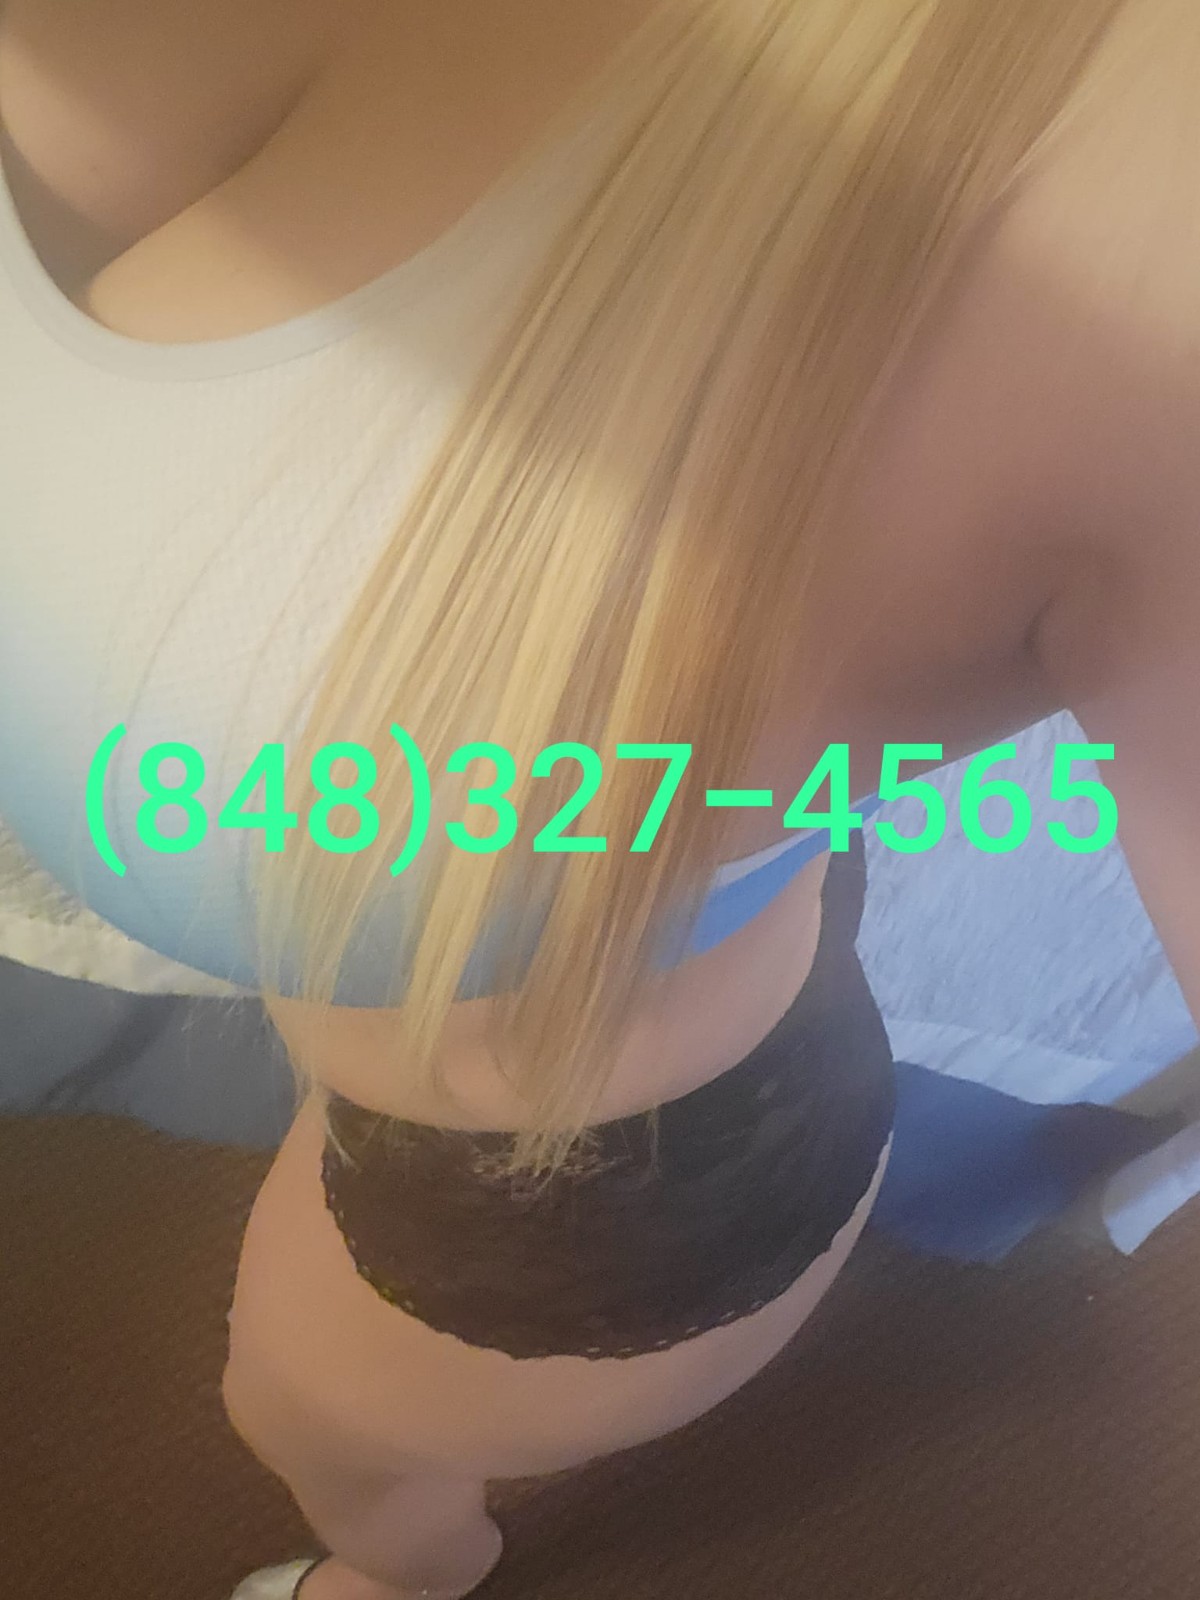 Reviews about escort with phone number 8483274565